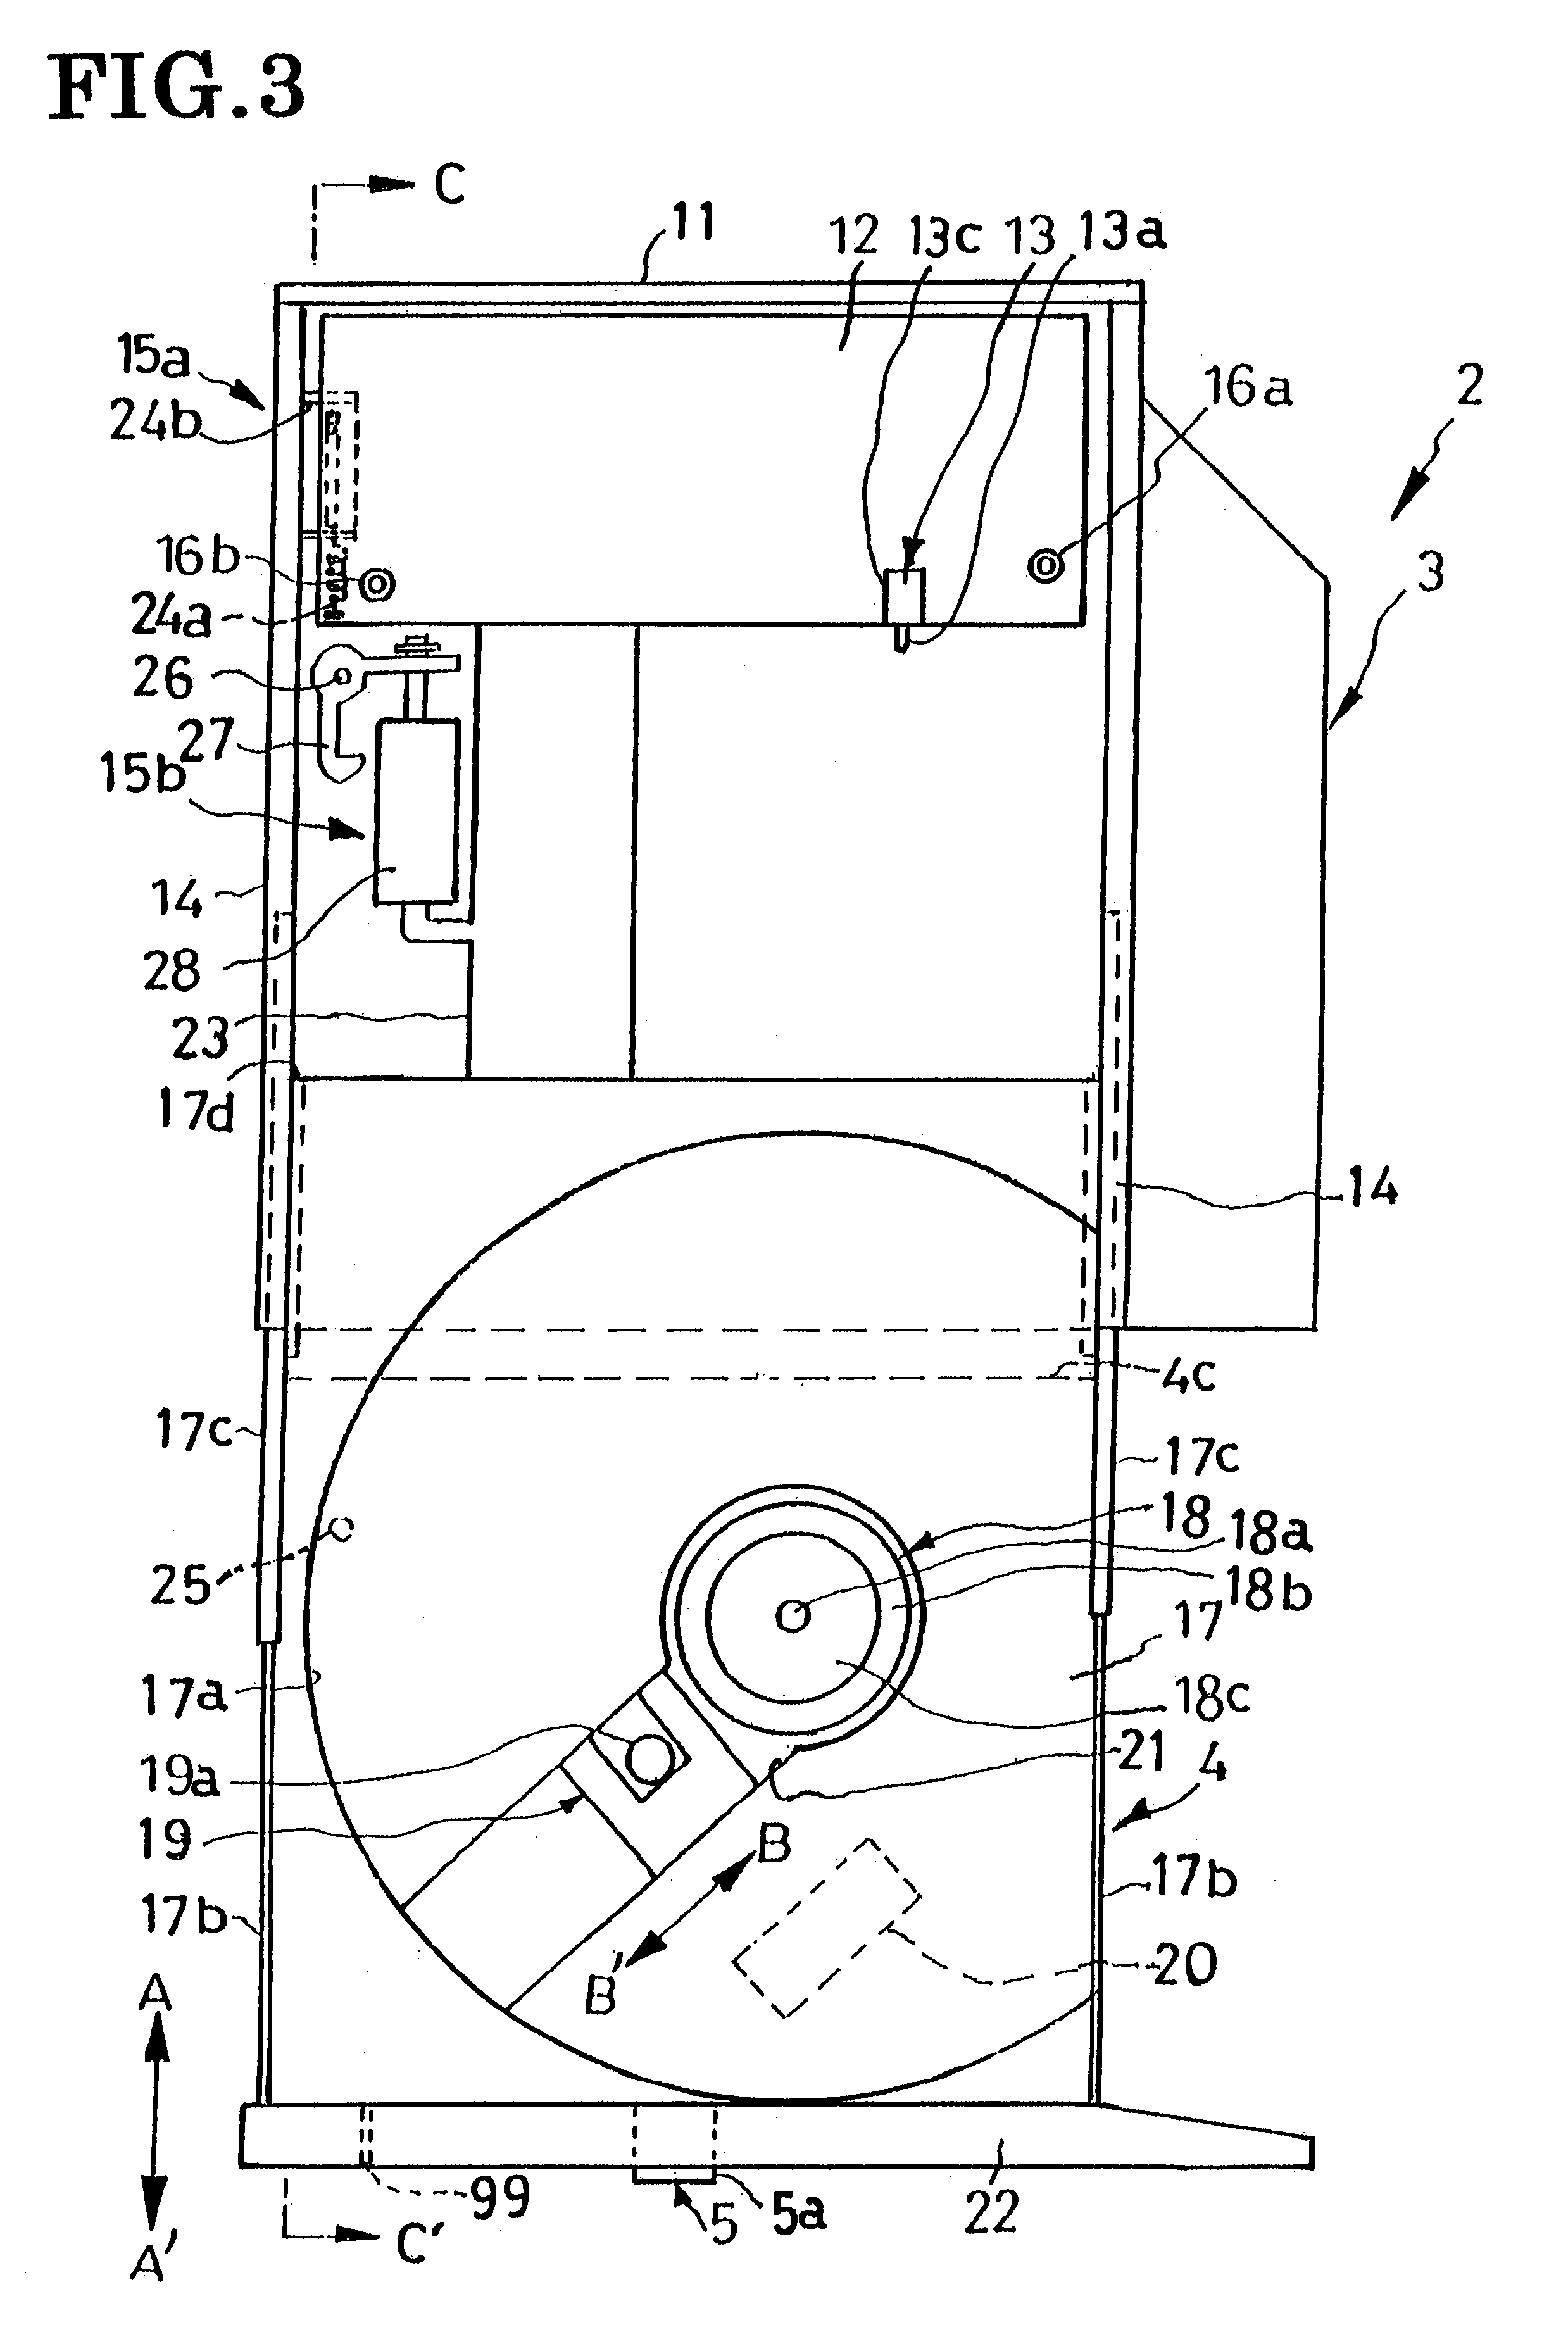 Data conversion apparatus with safety circuit